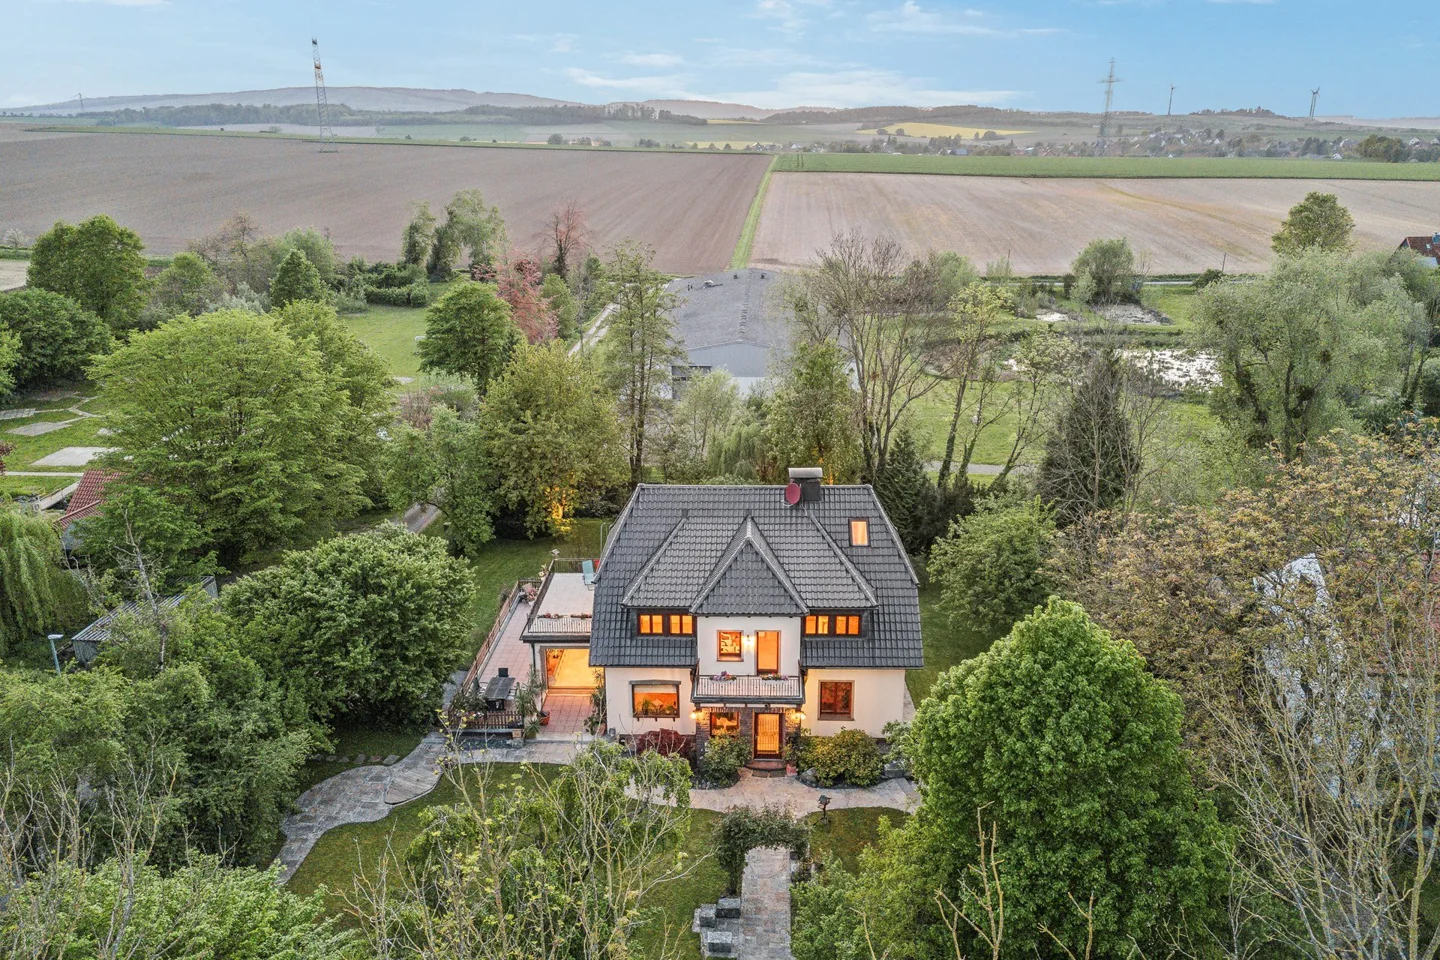 Charismatic villa near Hanover: lovingly renovated and surrounded by natural beauty